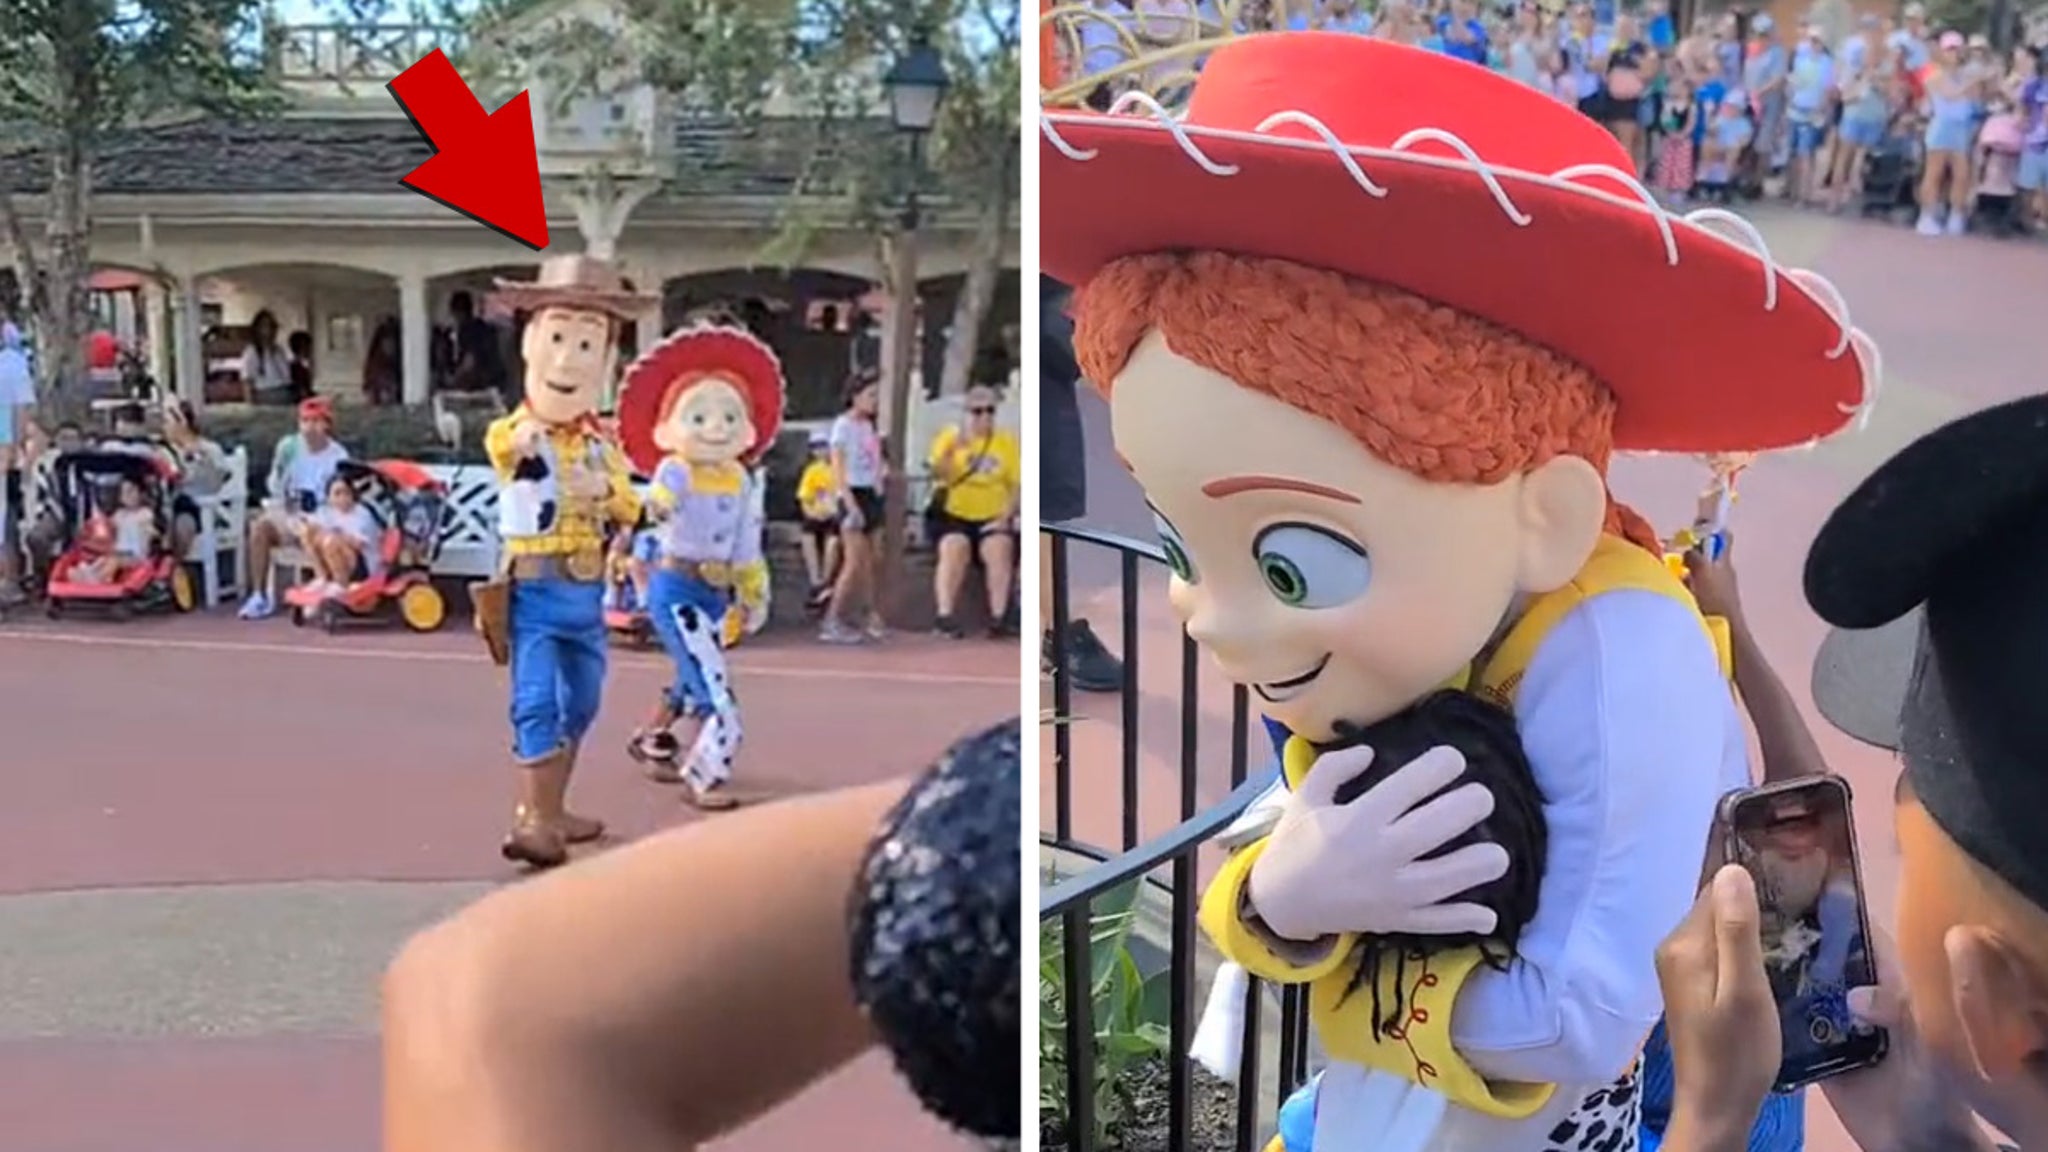 ‘Toy Story’ Character Makes Sure to Greet, Hug Black Children at Disney World